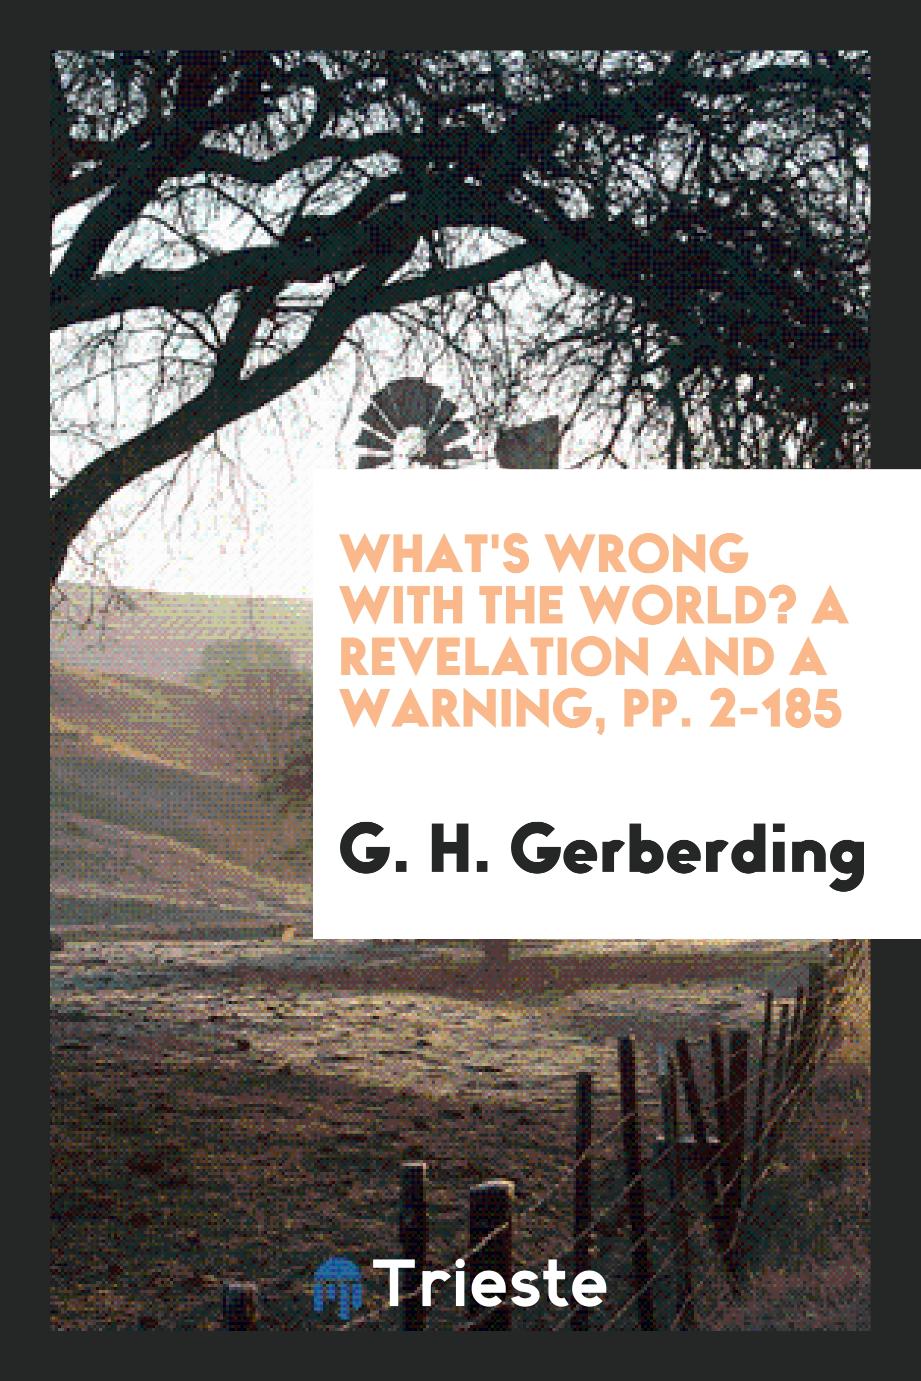 What's Wrong with the World? A Revelation and a Warning, pp. 2-185